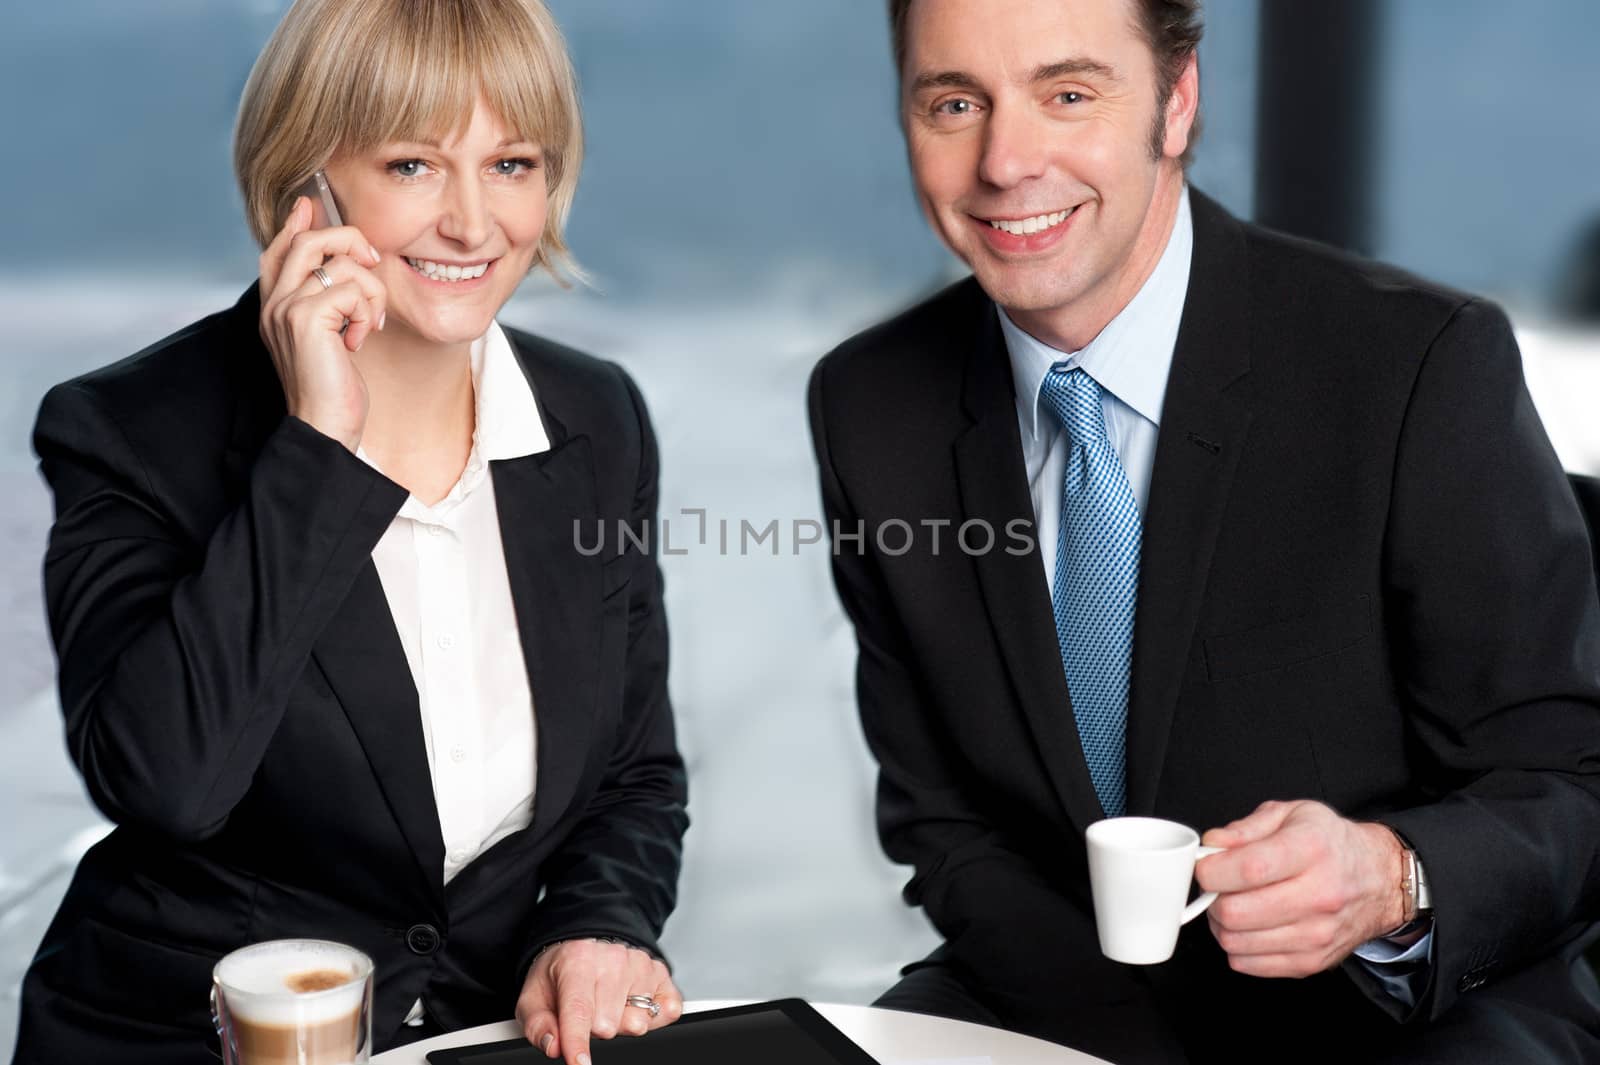 Business colleagues discussing work at break by stockyimages